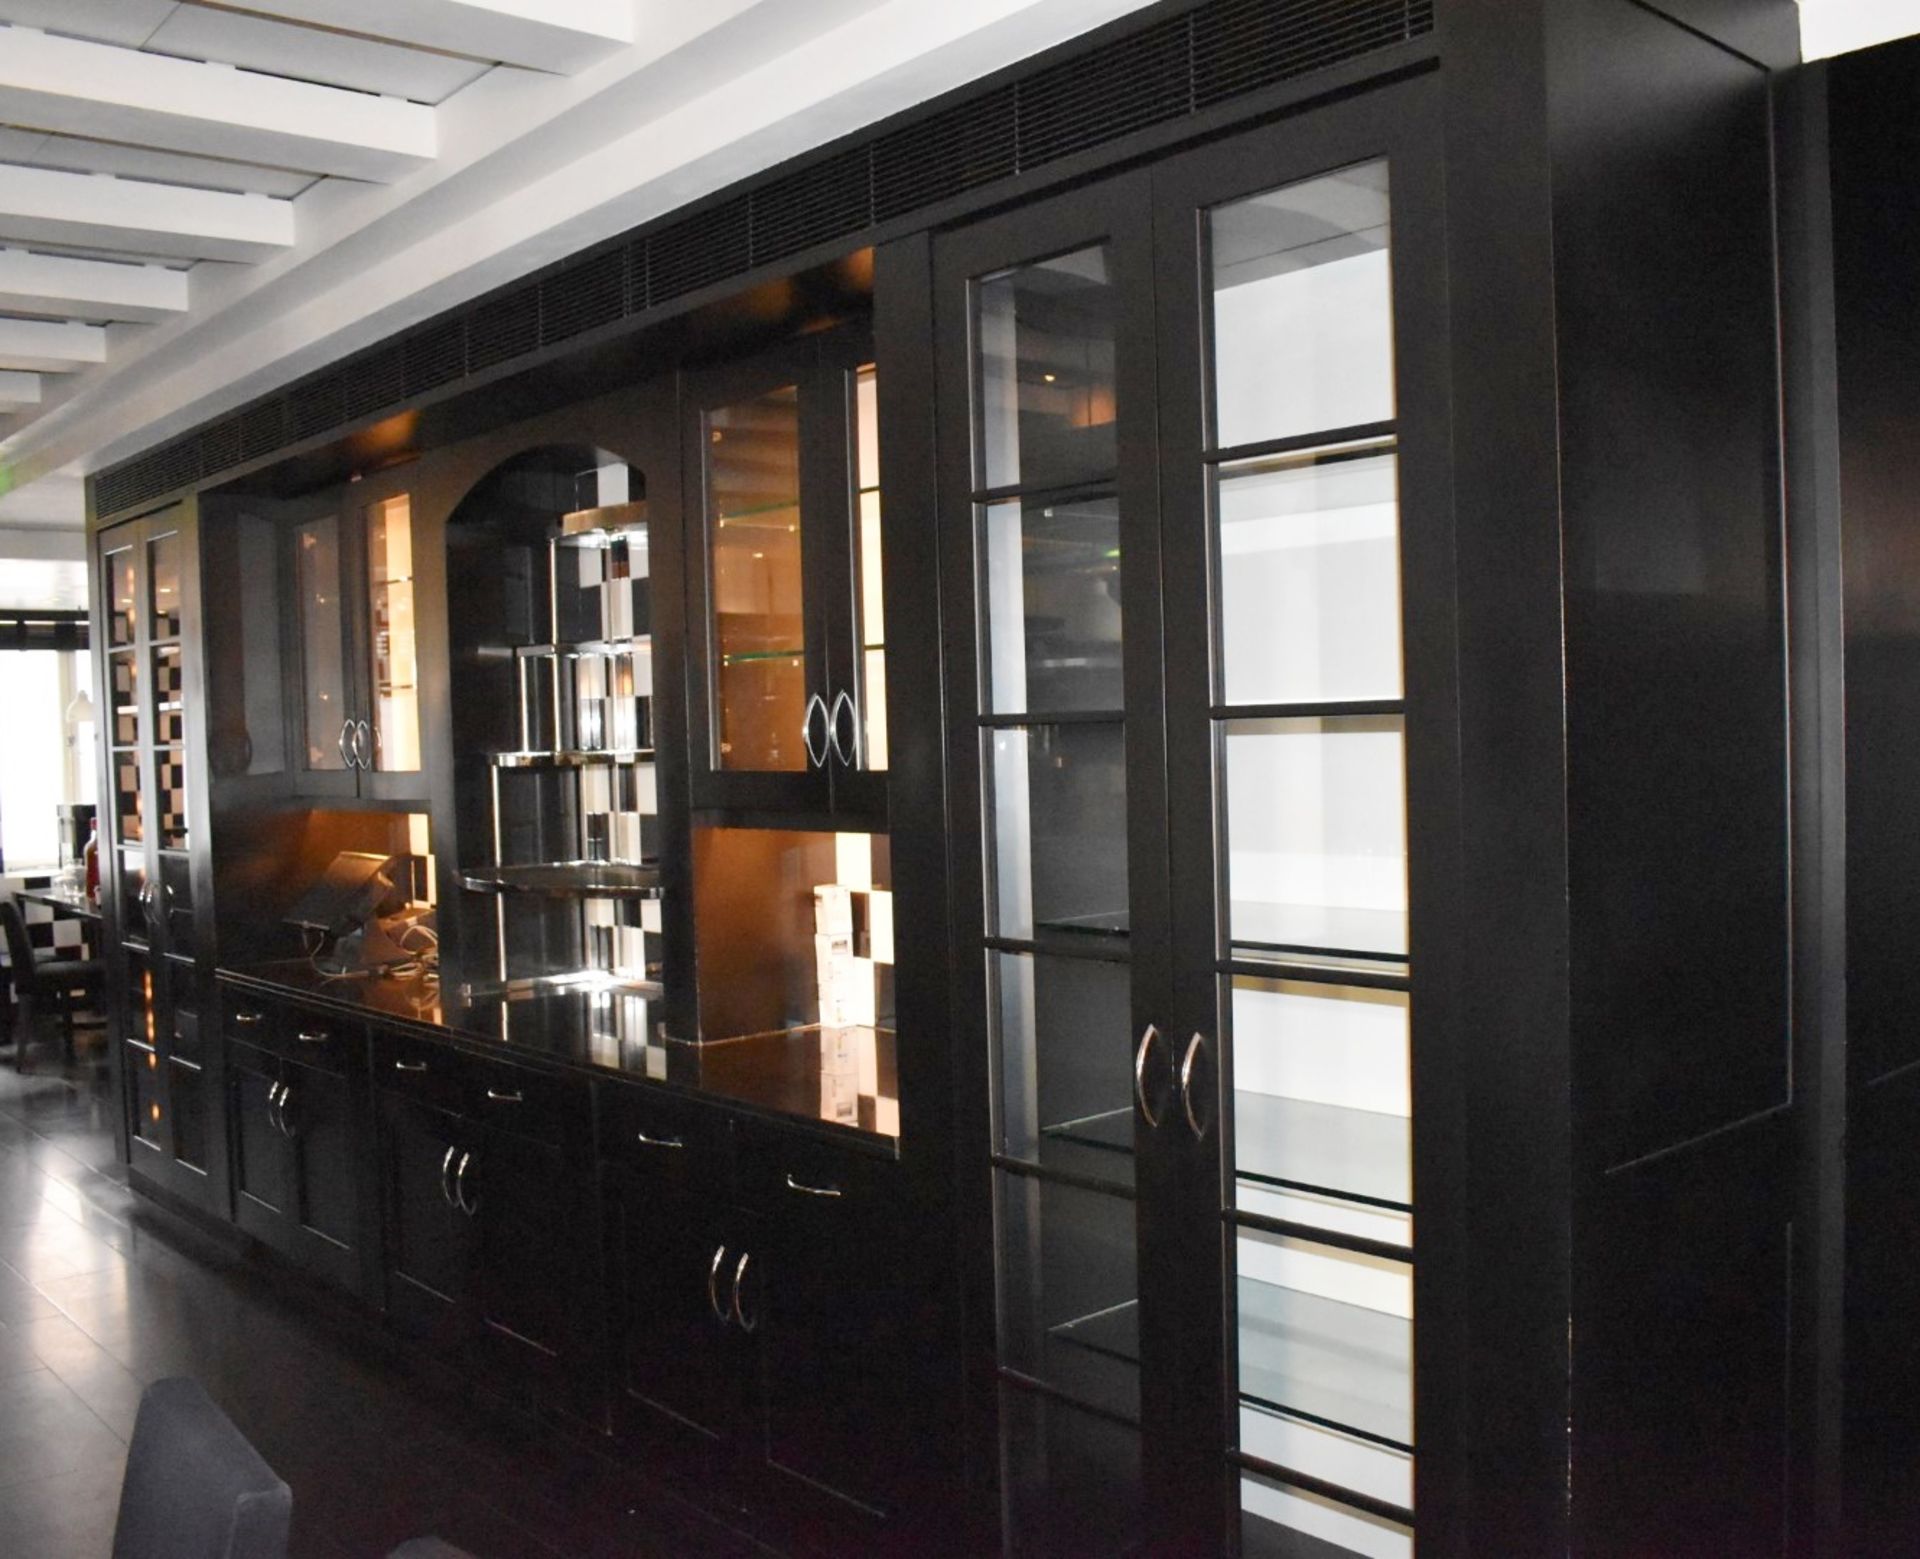 1 x Large Wall Dresser / Server Cabinet in Black - Features Epos Stations, Display Cabinets, Storage